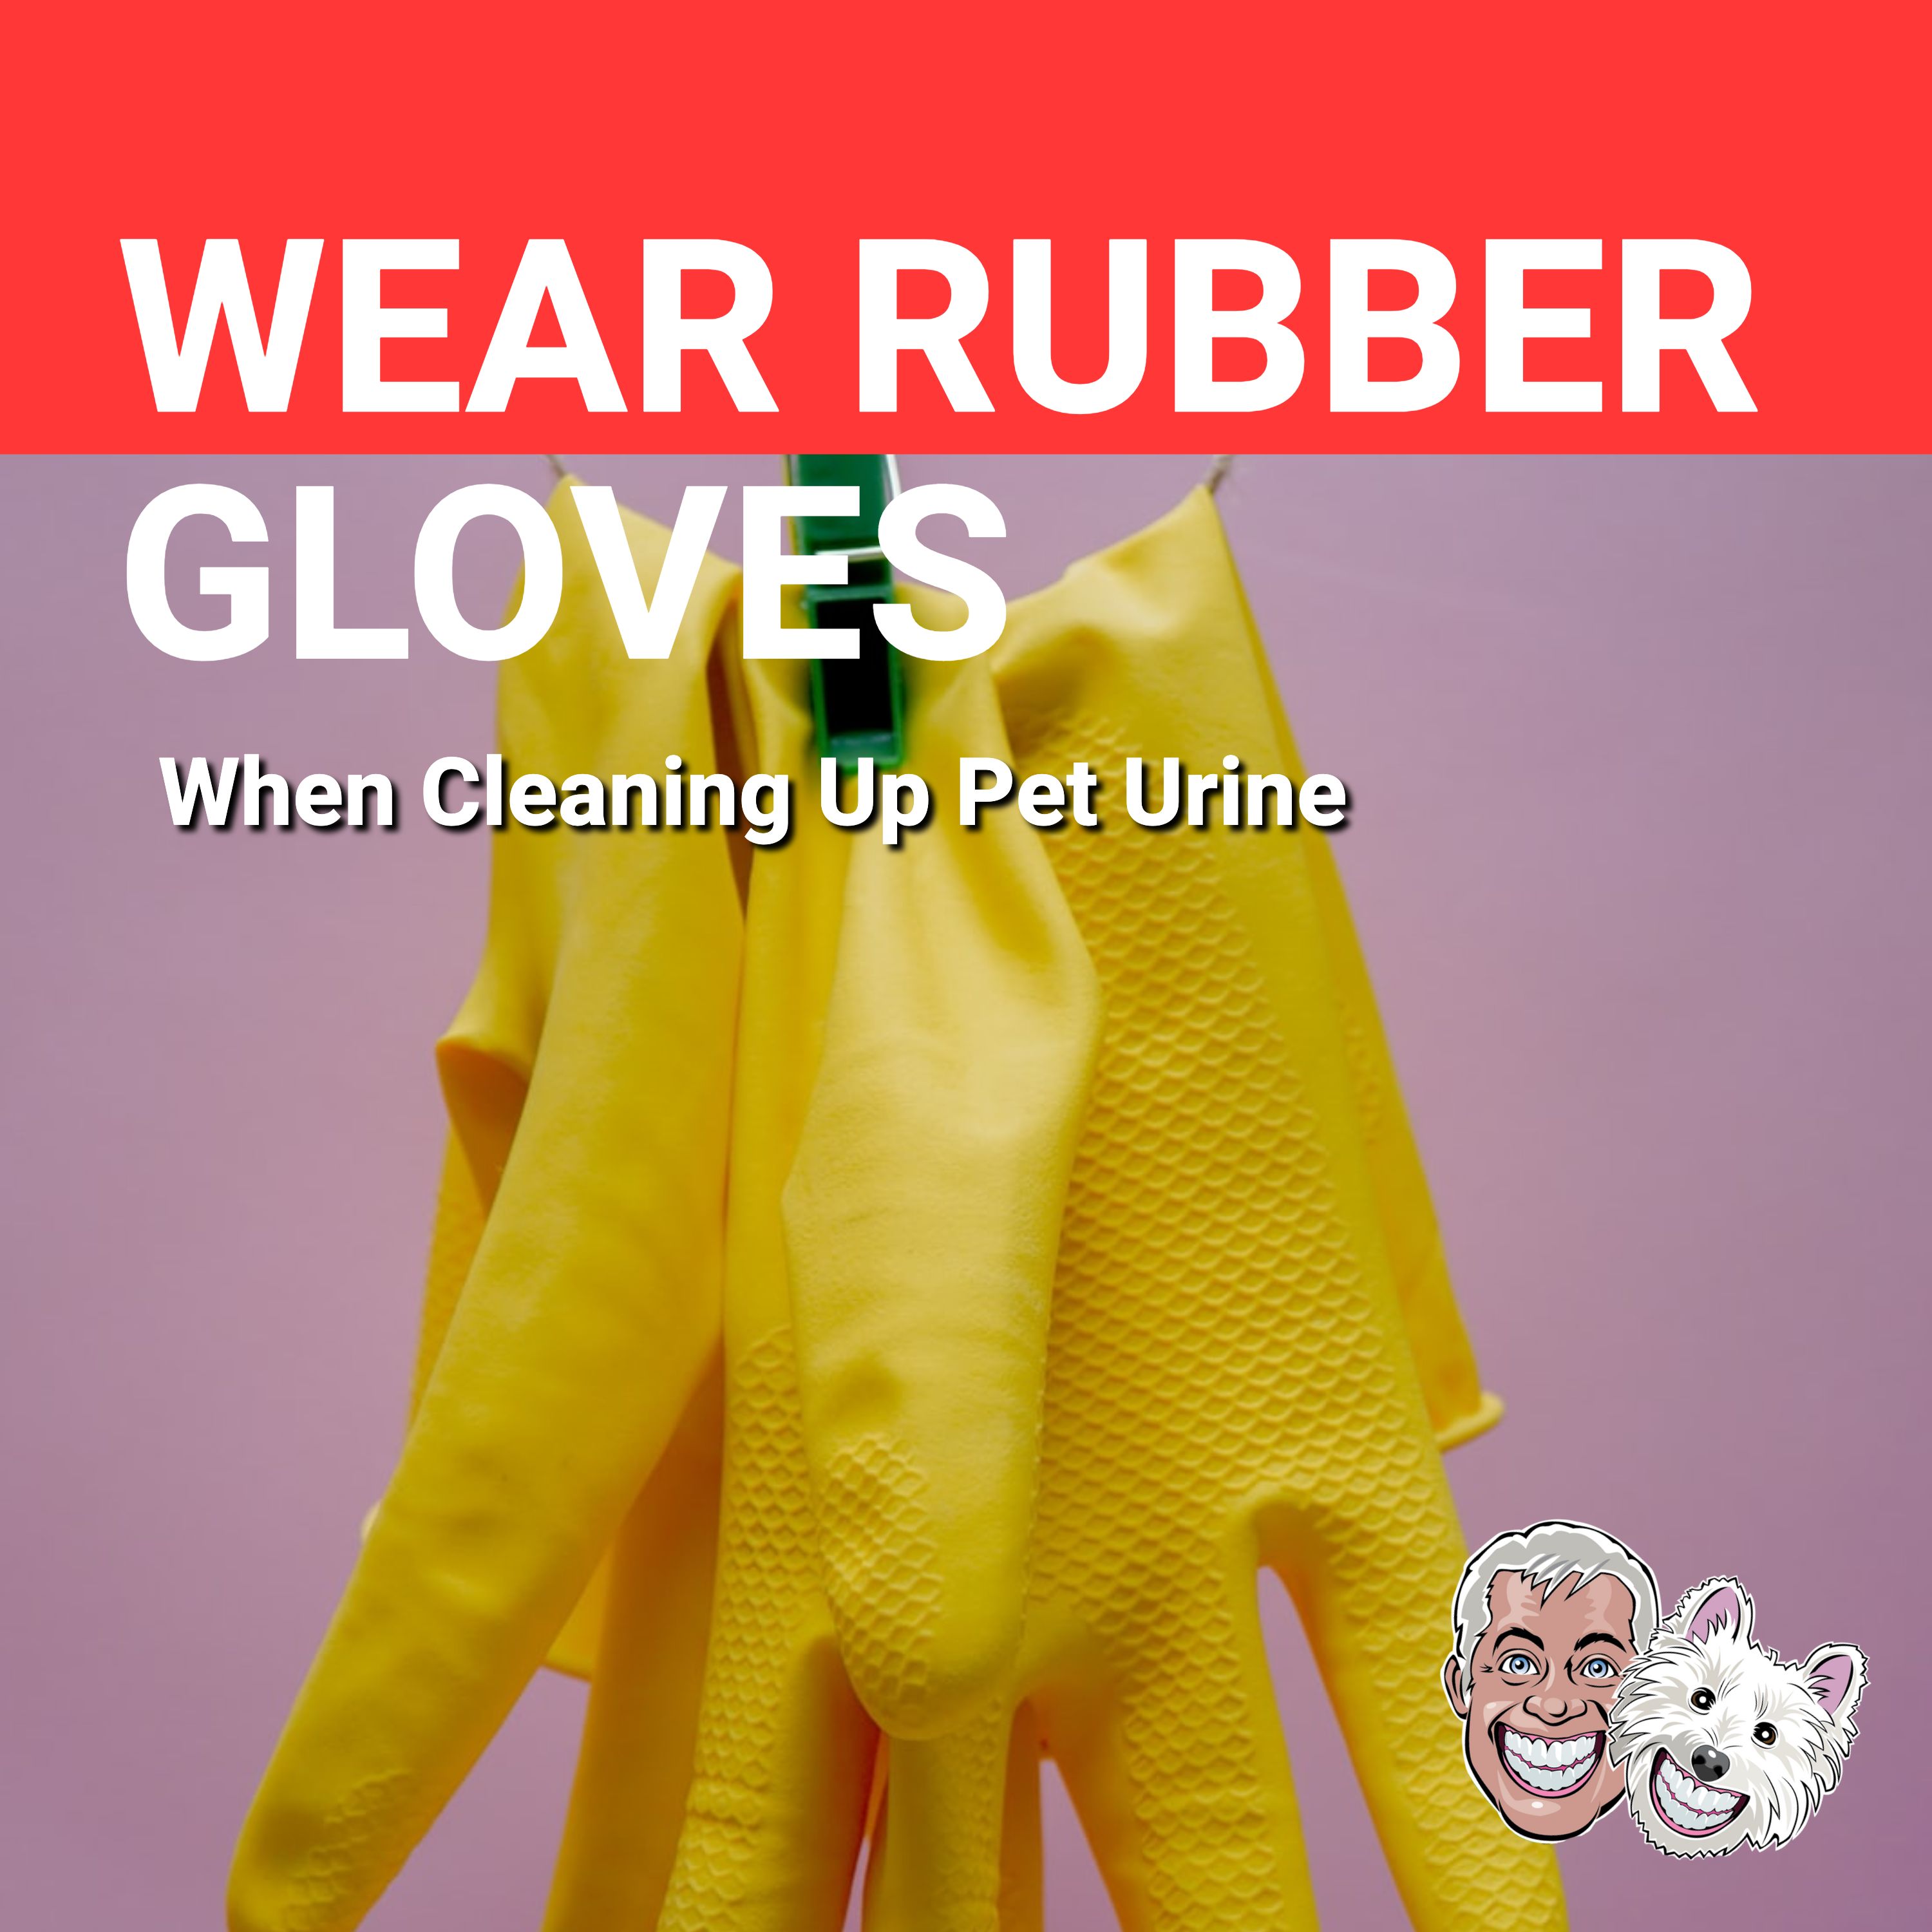 Wear rubber gloves to clean up pet urine odor